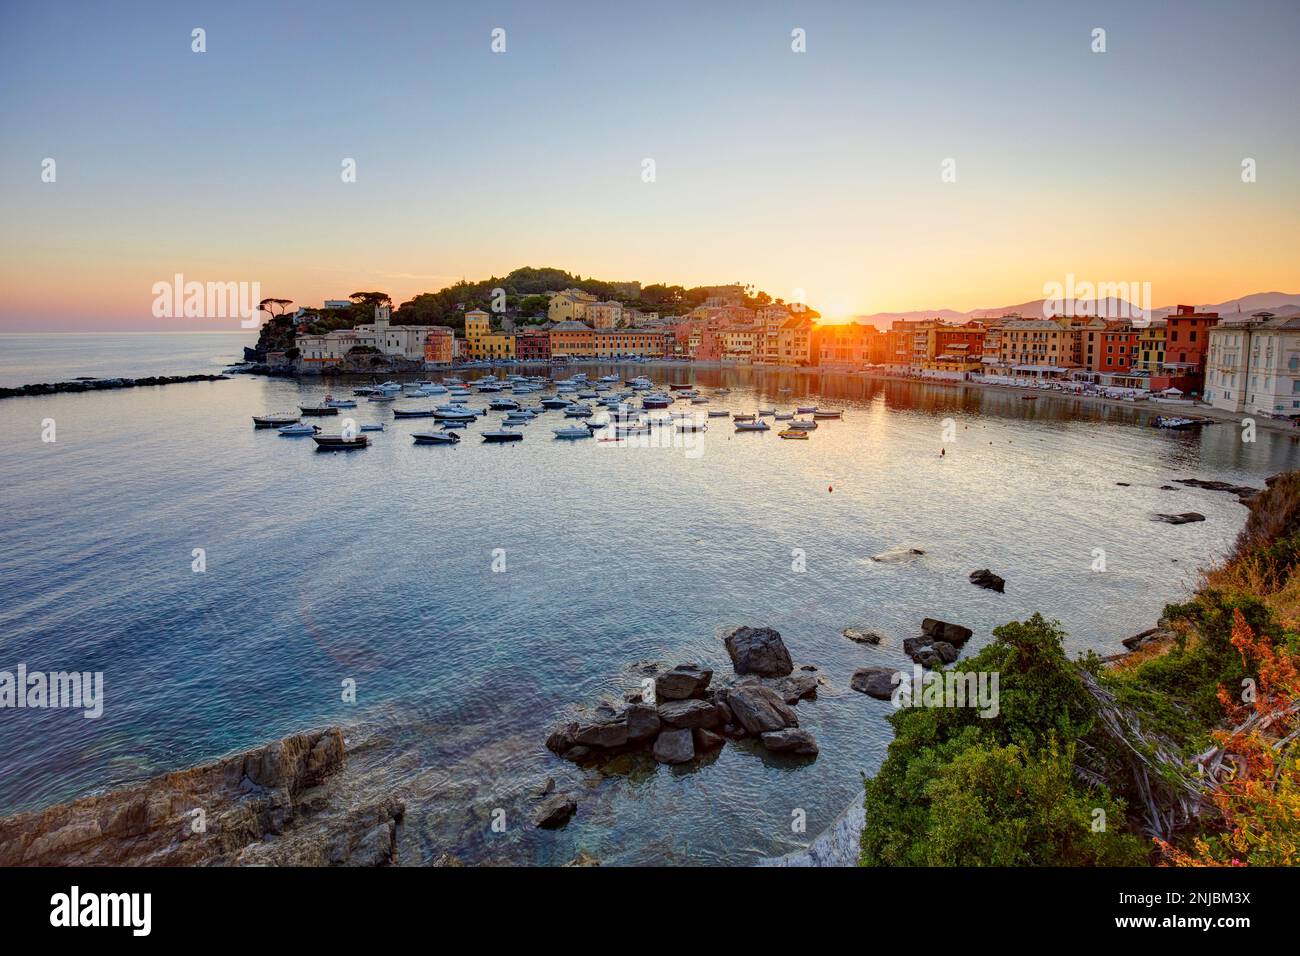 Silent bay at sunset, Sestri Levante, Italy Stock Photo